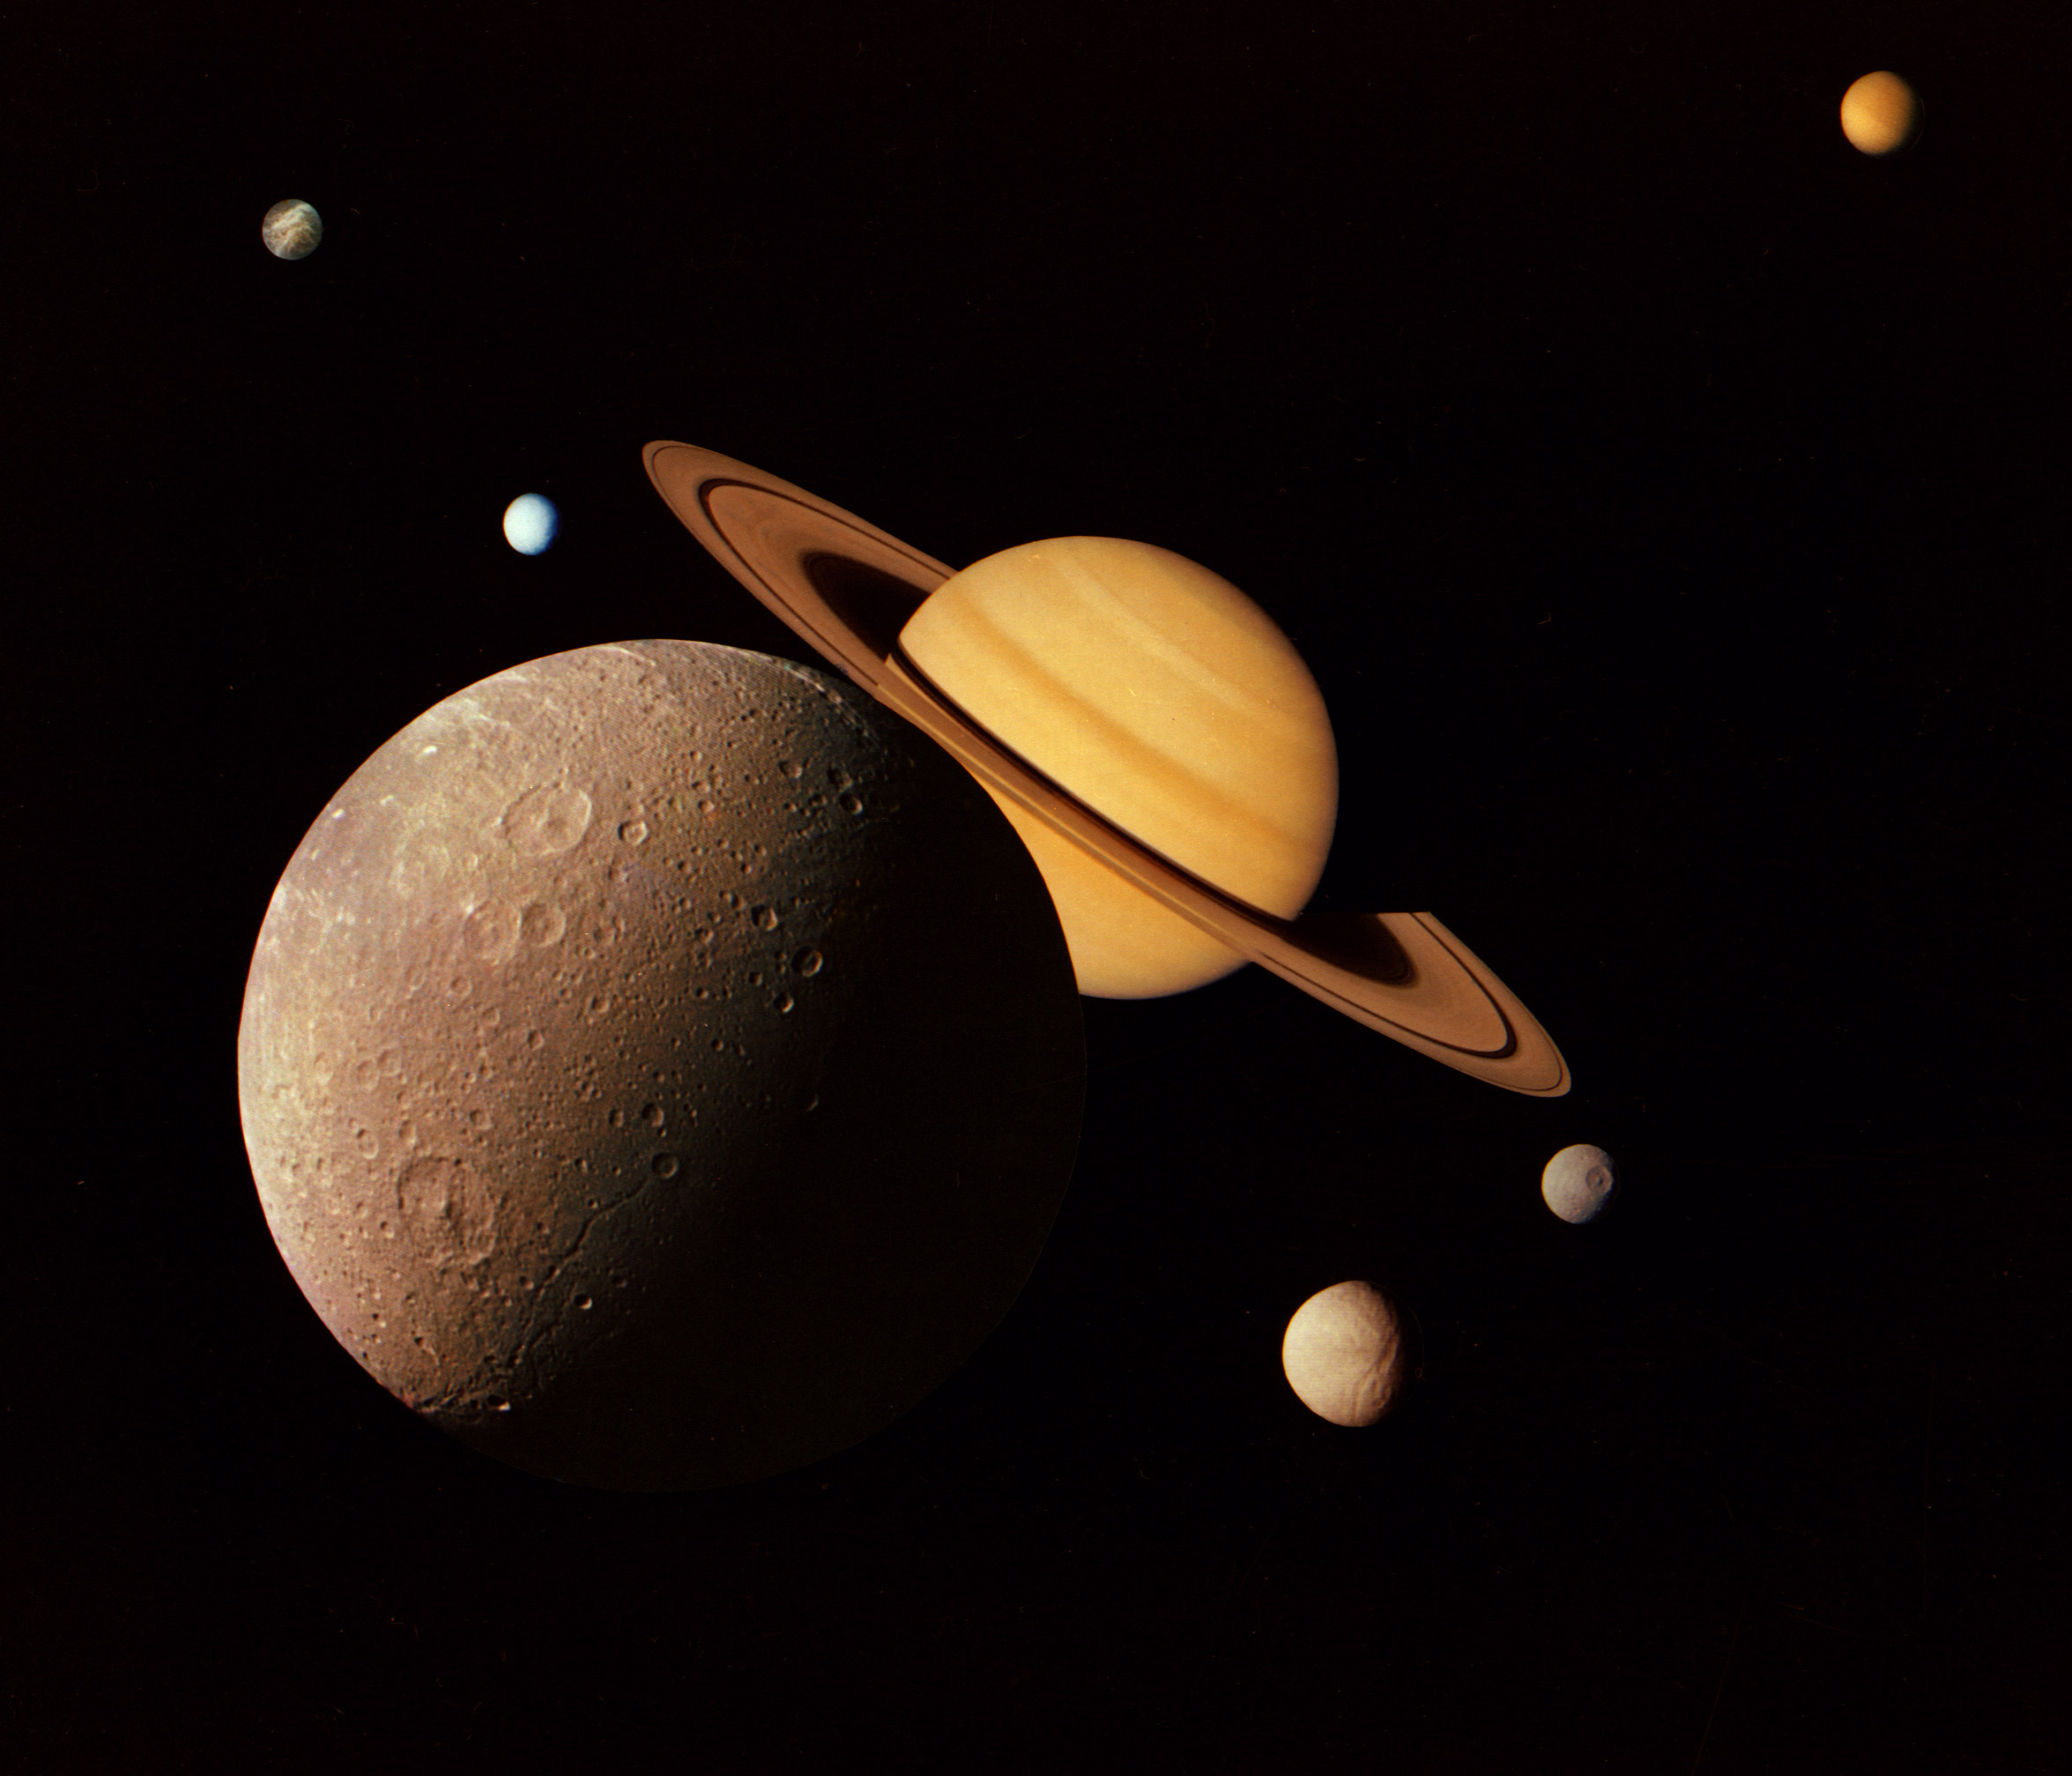 This montage of images of the Saturnian system was prepared from an assemblage of images taken by the Voyager 1 spacecraft during its Saturn encounter in November 1980. This artist's view shows Dione in the forefront, Saturn rising behind, Tethys and Mimas fading in the distance to the right, Enceladus and Rhea off Saturn's rings to the left, and Titan in its distant orbit at the top. The Voyager Project is managed for NASA by the Jet Propulsion Laboratory, Pasadena, California.